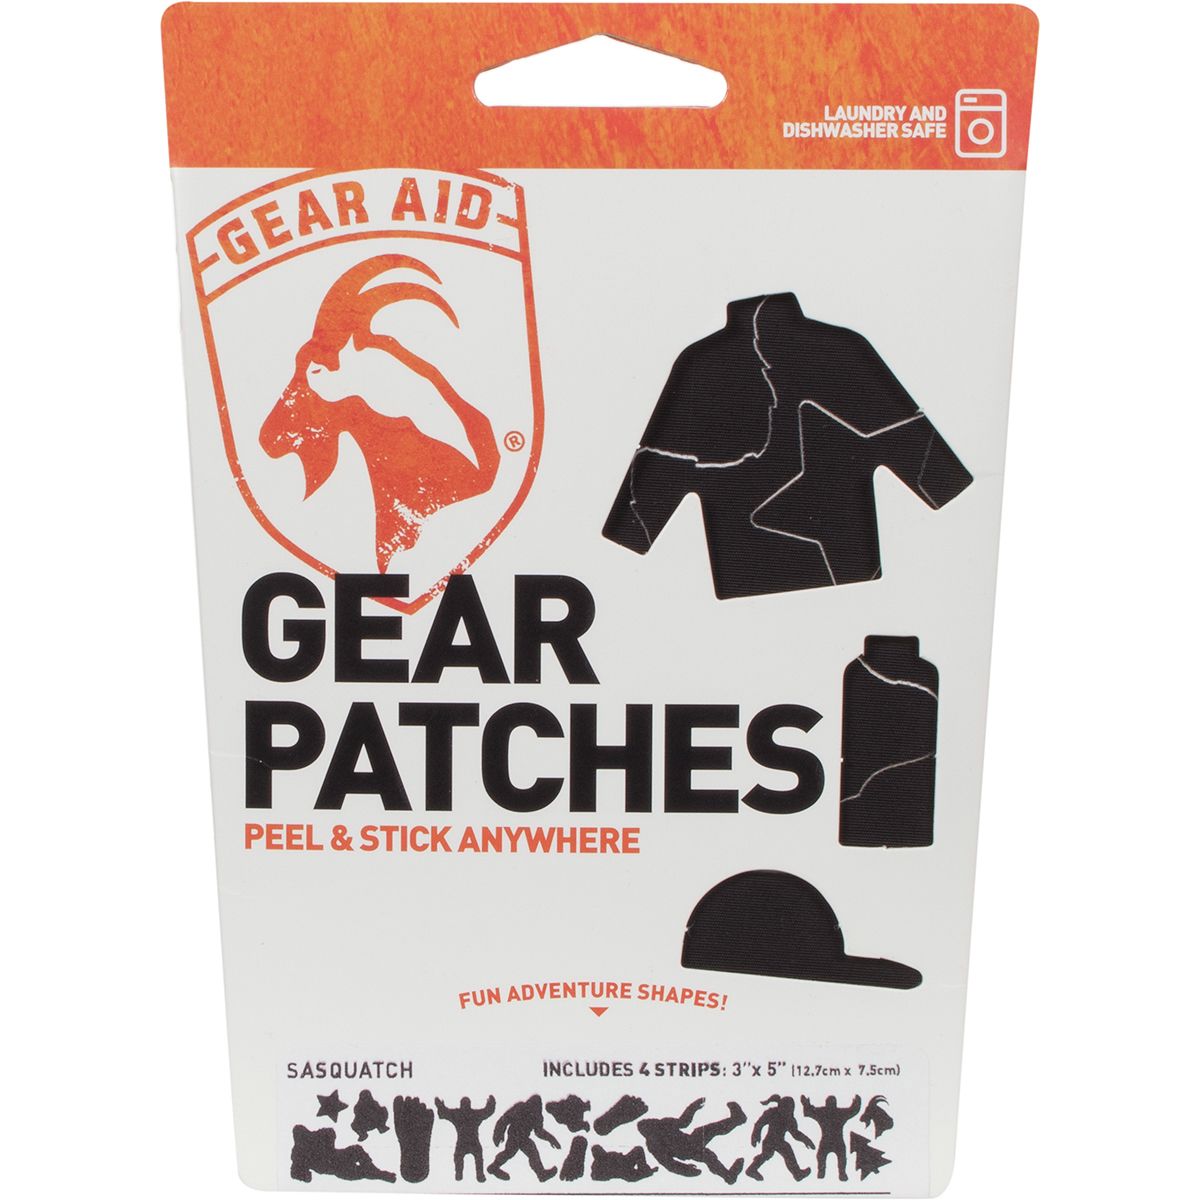 Gear Aid Tenacious Tape Patches - Hike & Camp